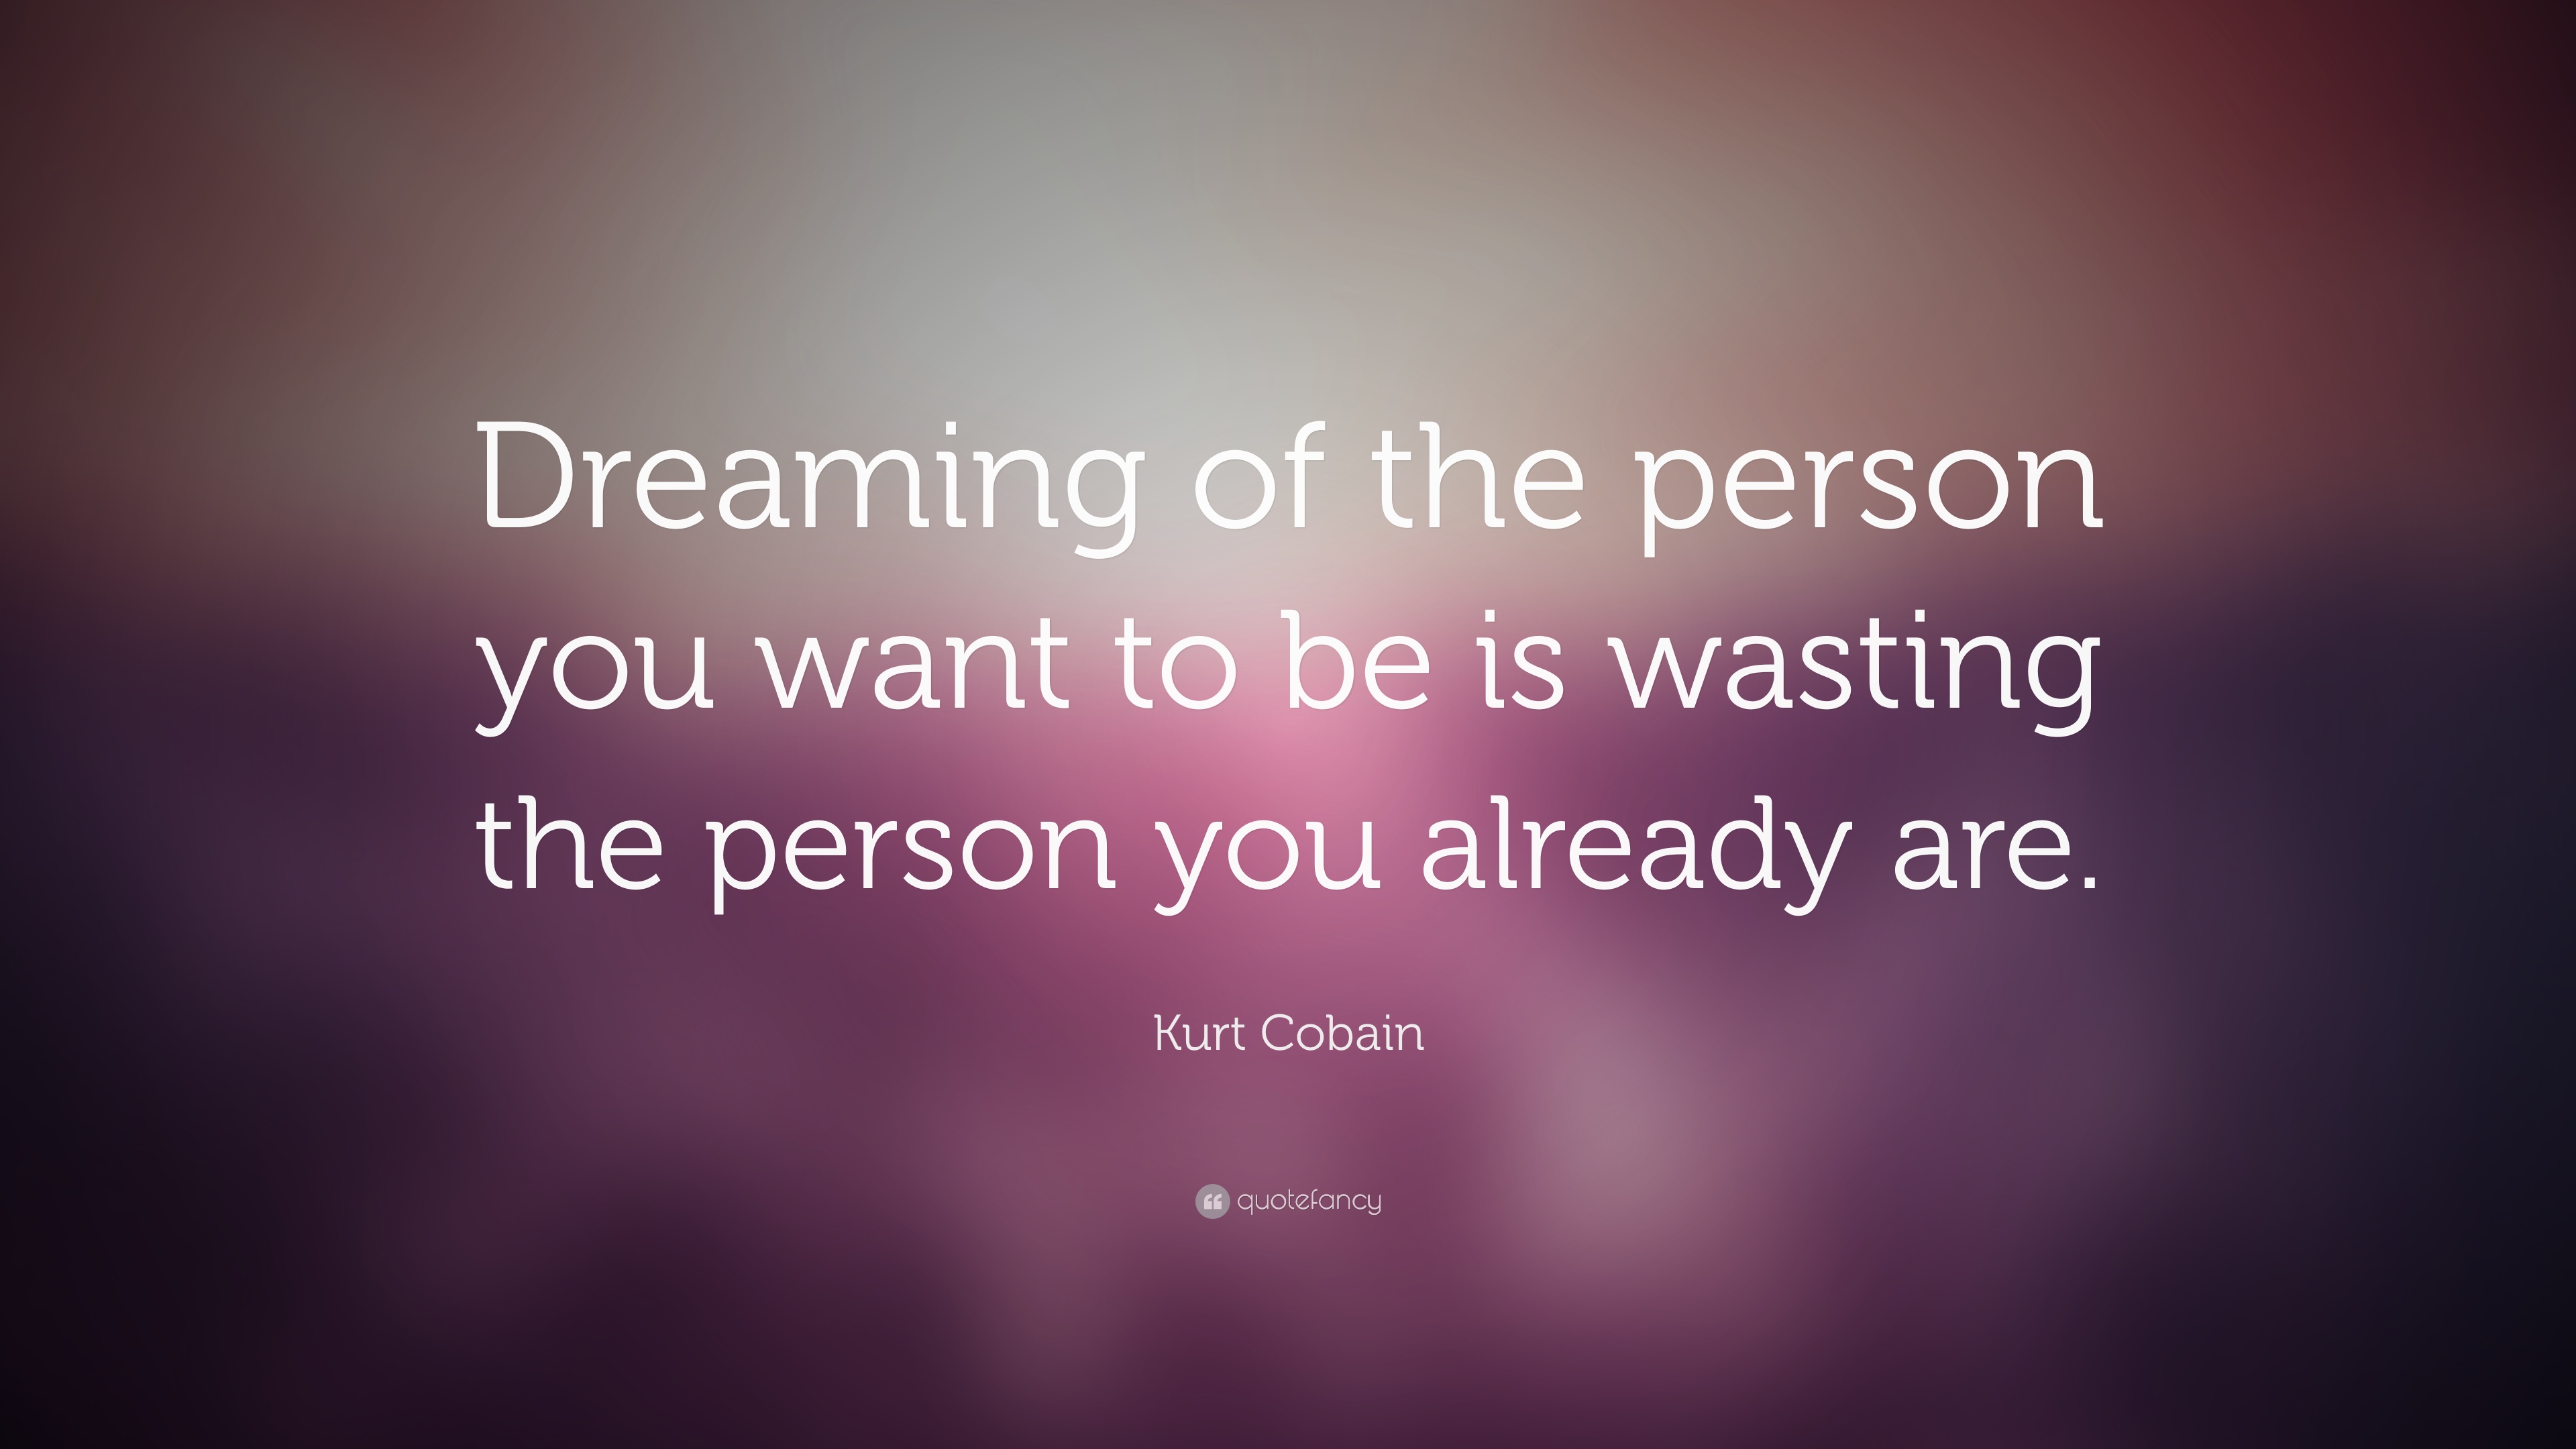 Kurt Cobain Quote: “Dreaming of the person you want to be is wasting ...